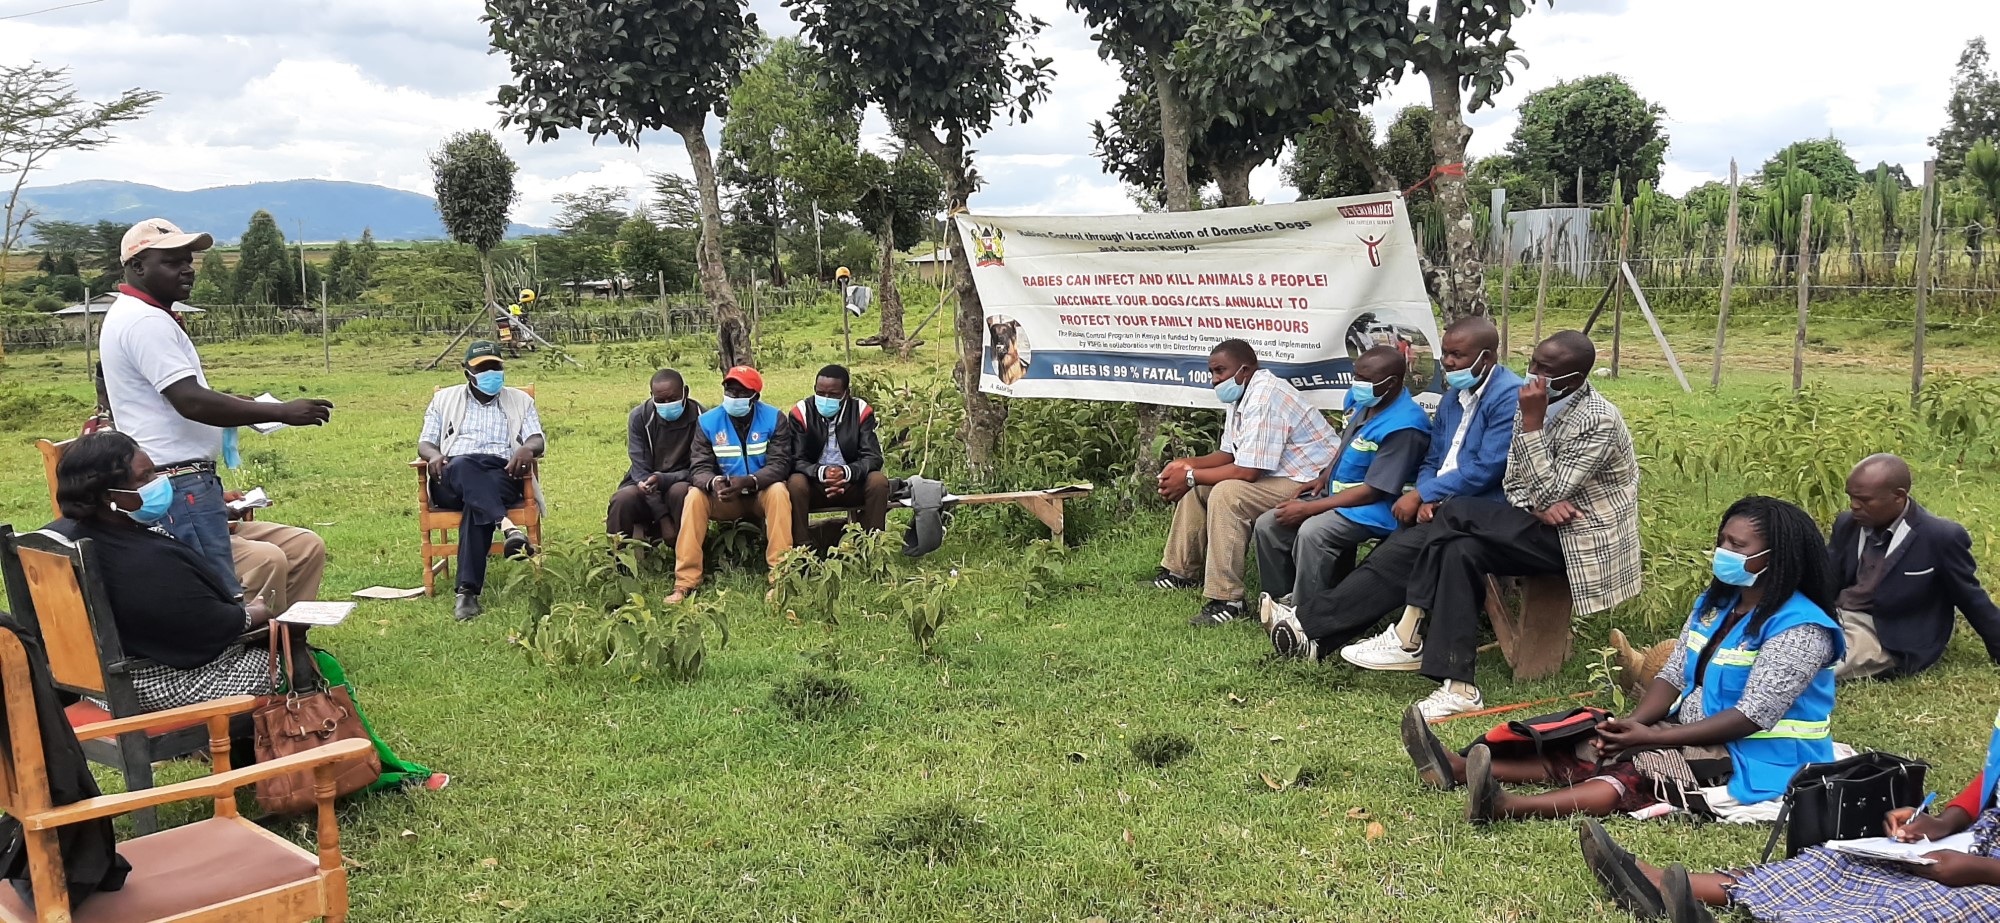 The VSF-G vaccination team is briefed by the project coordinator. Kenya